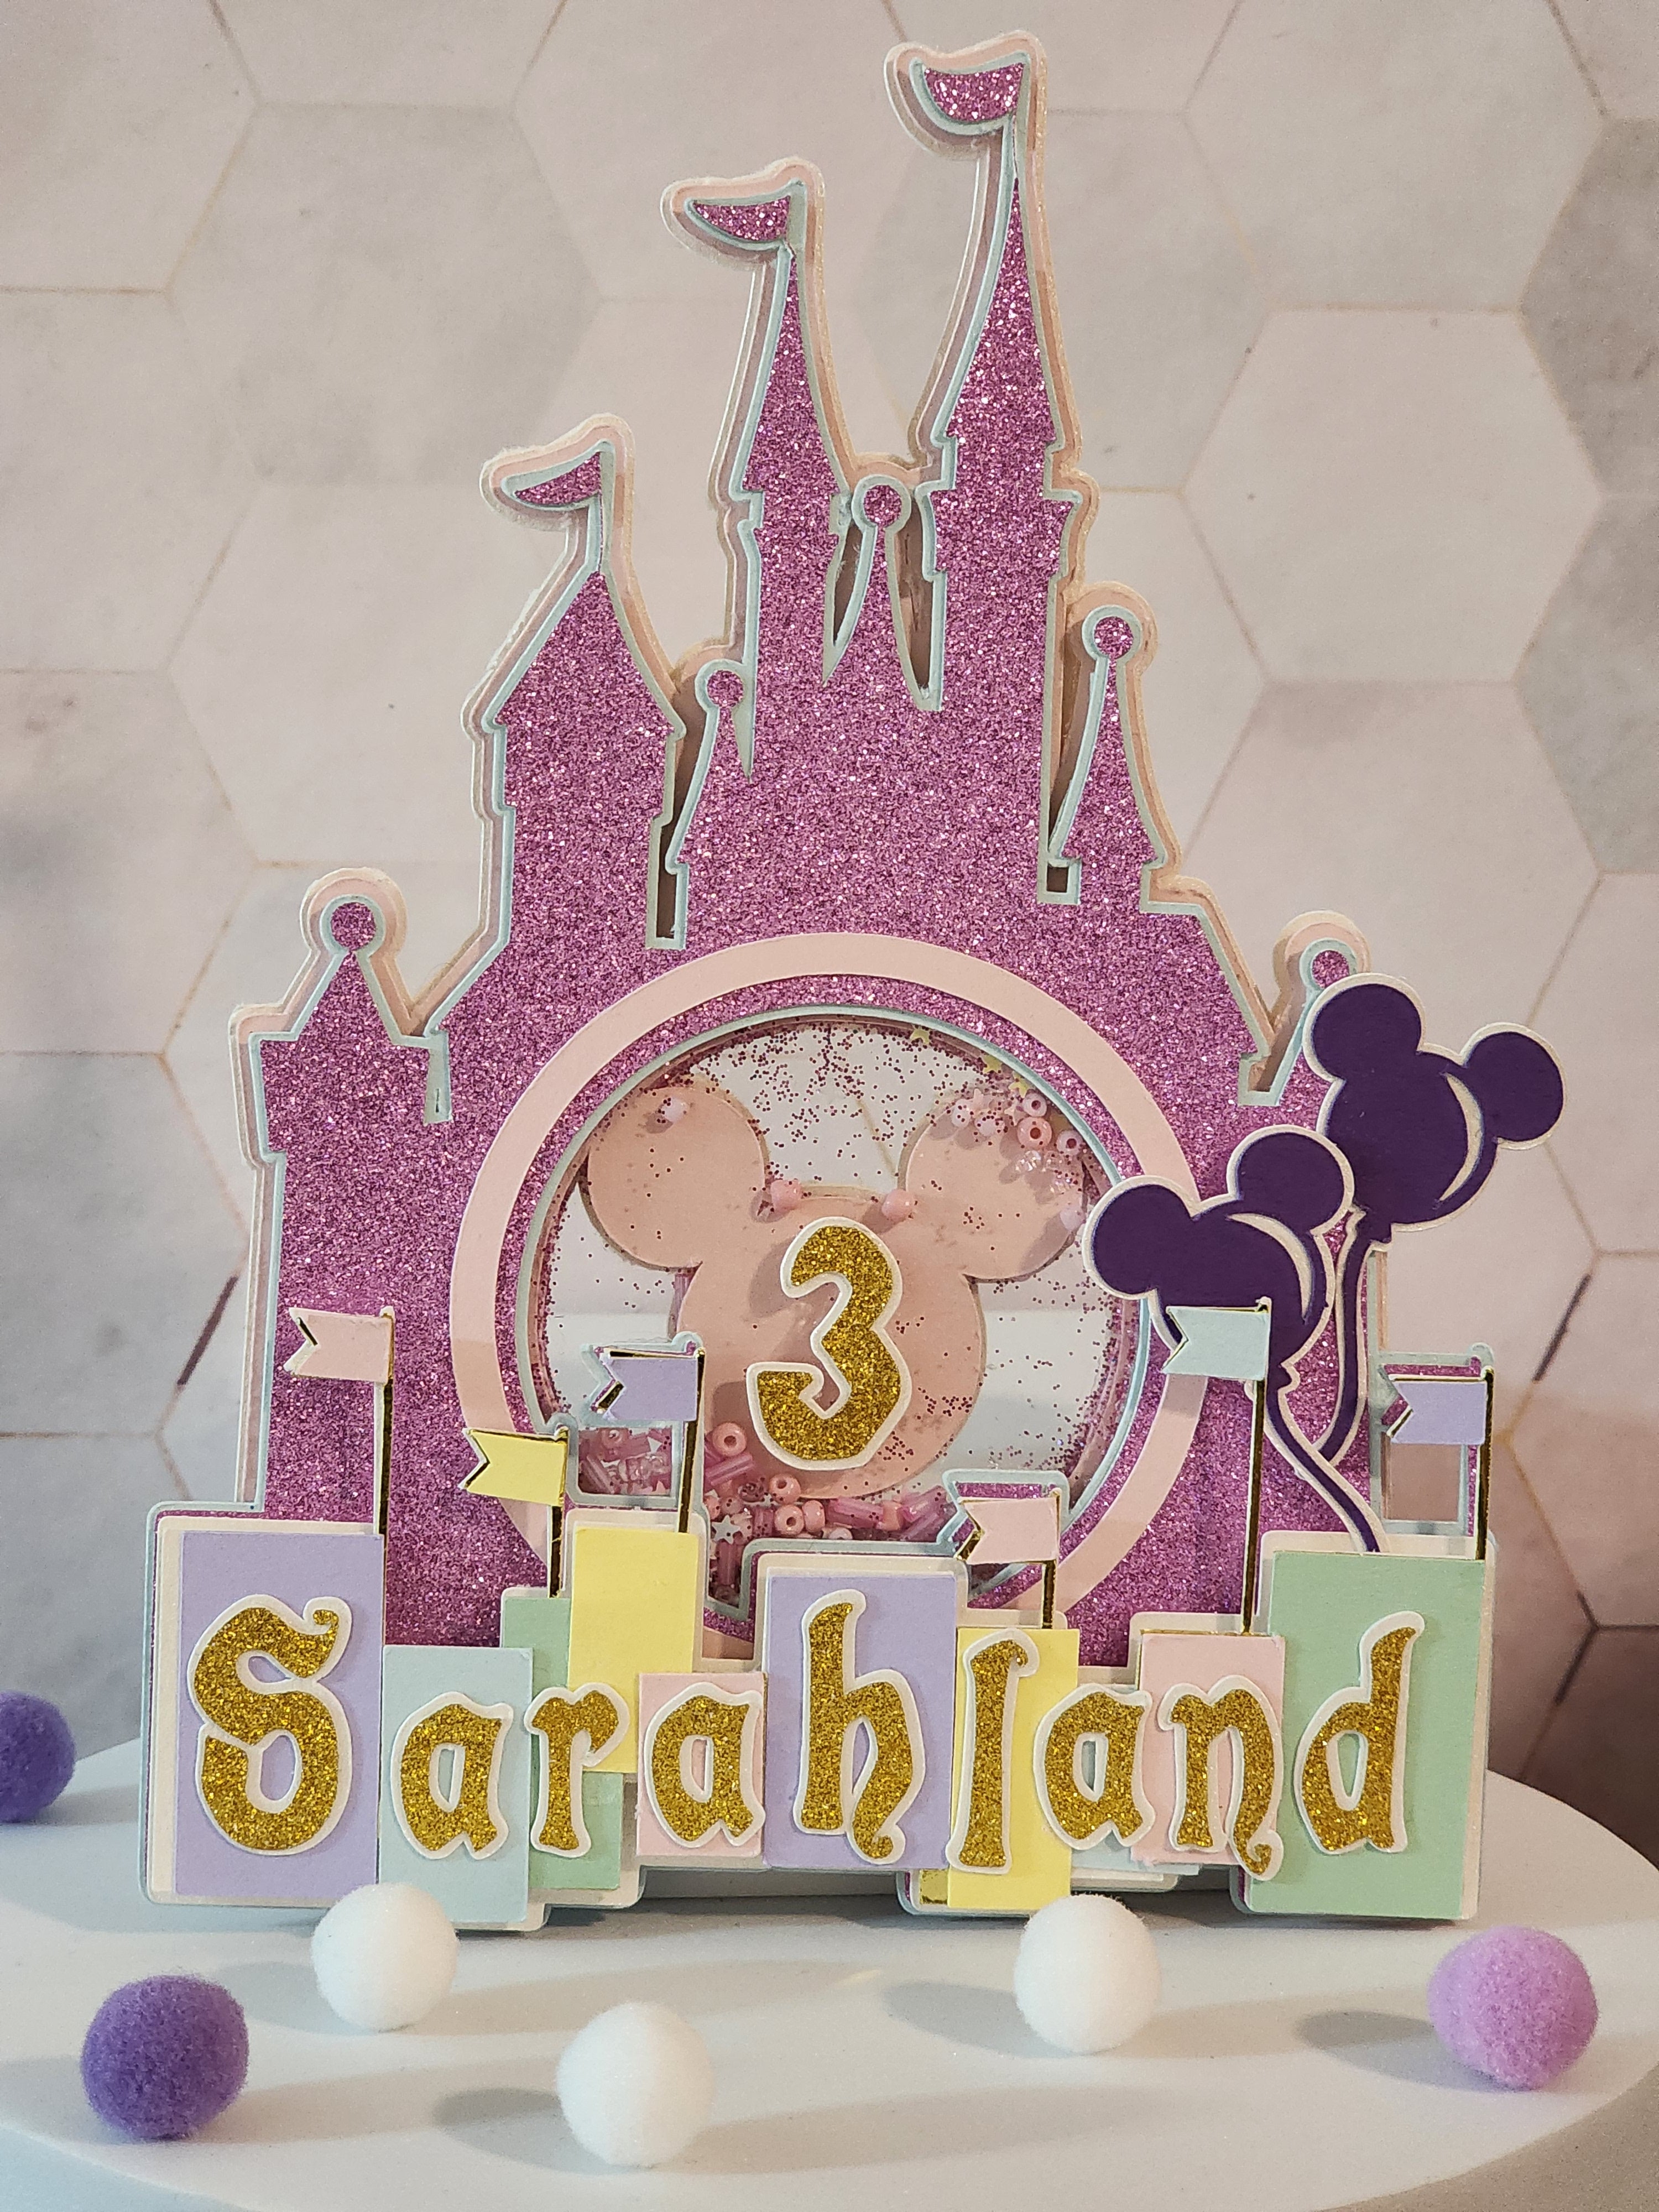 Disneyland Birthday Party - Made It. Ate It. Loved It.